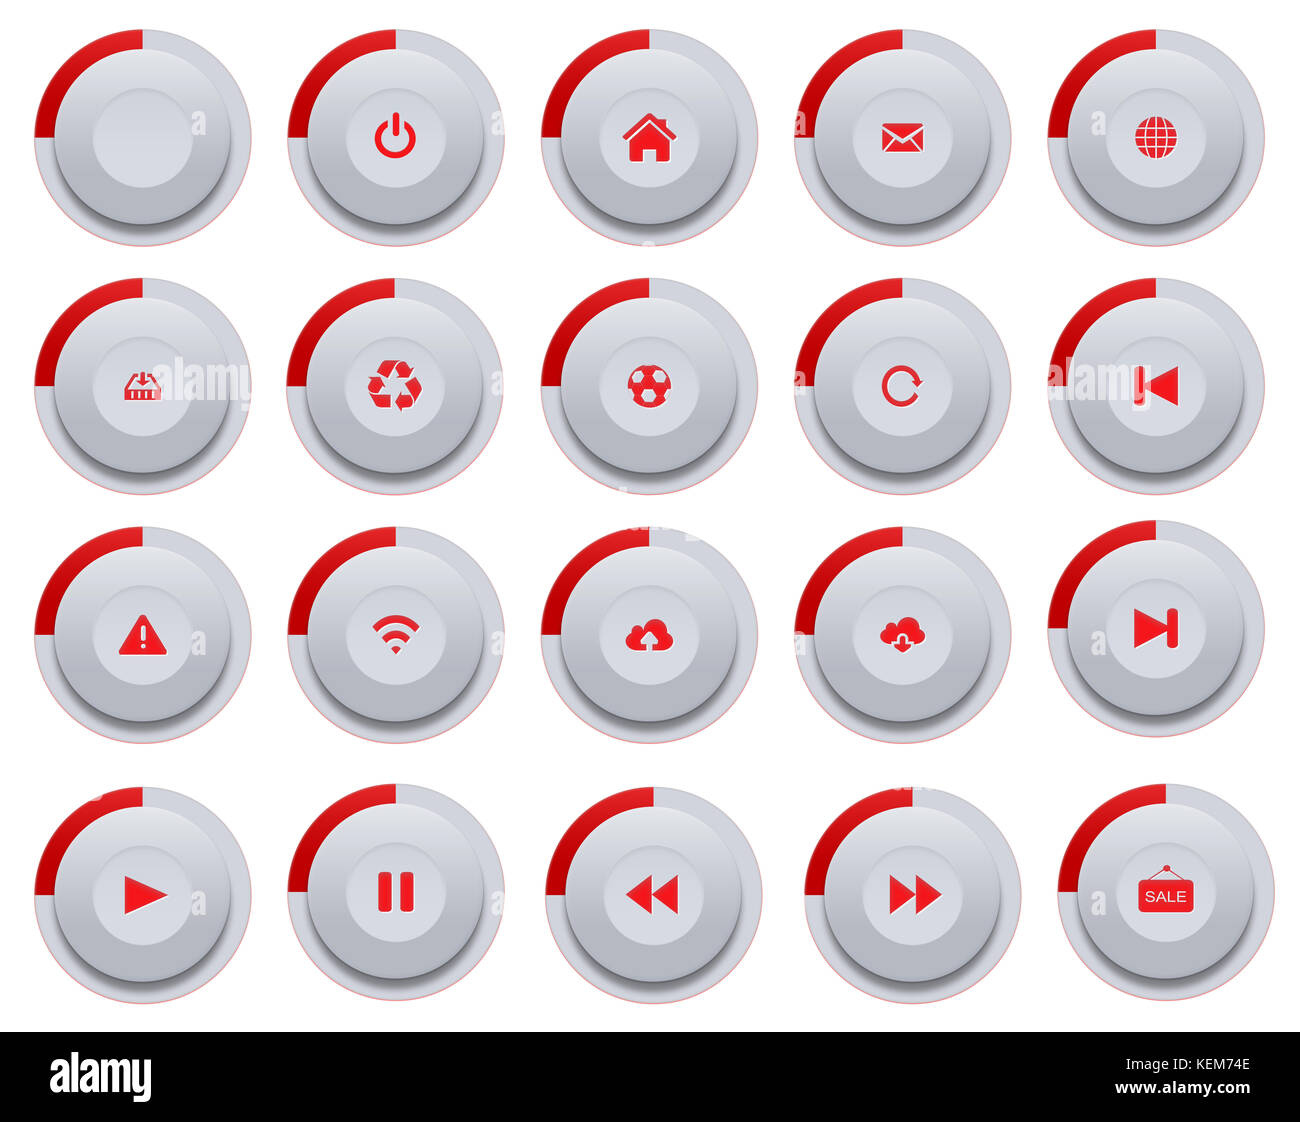 Illustration with set of modern buttons Stock Photo